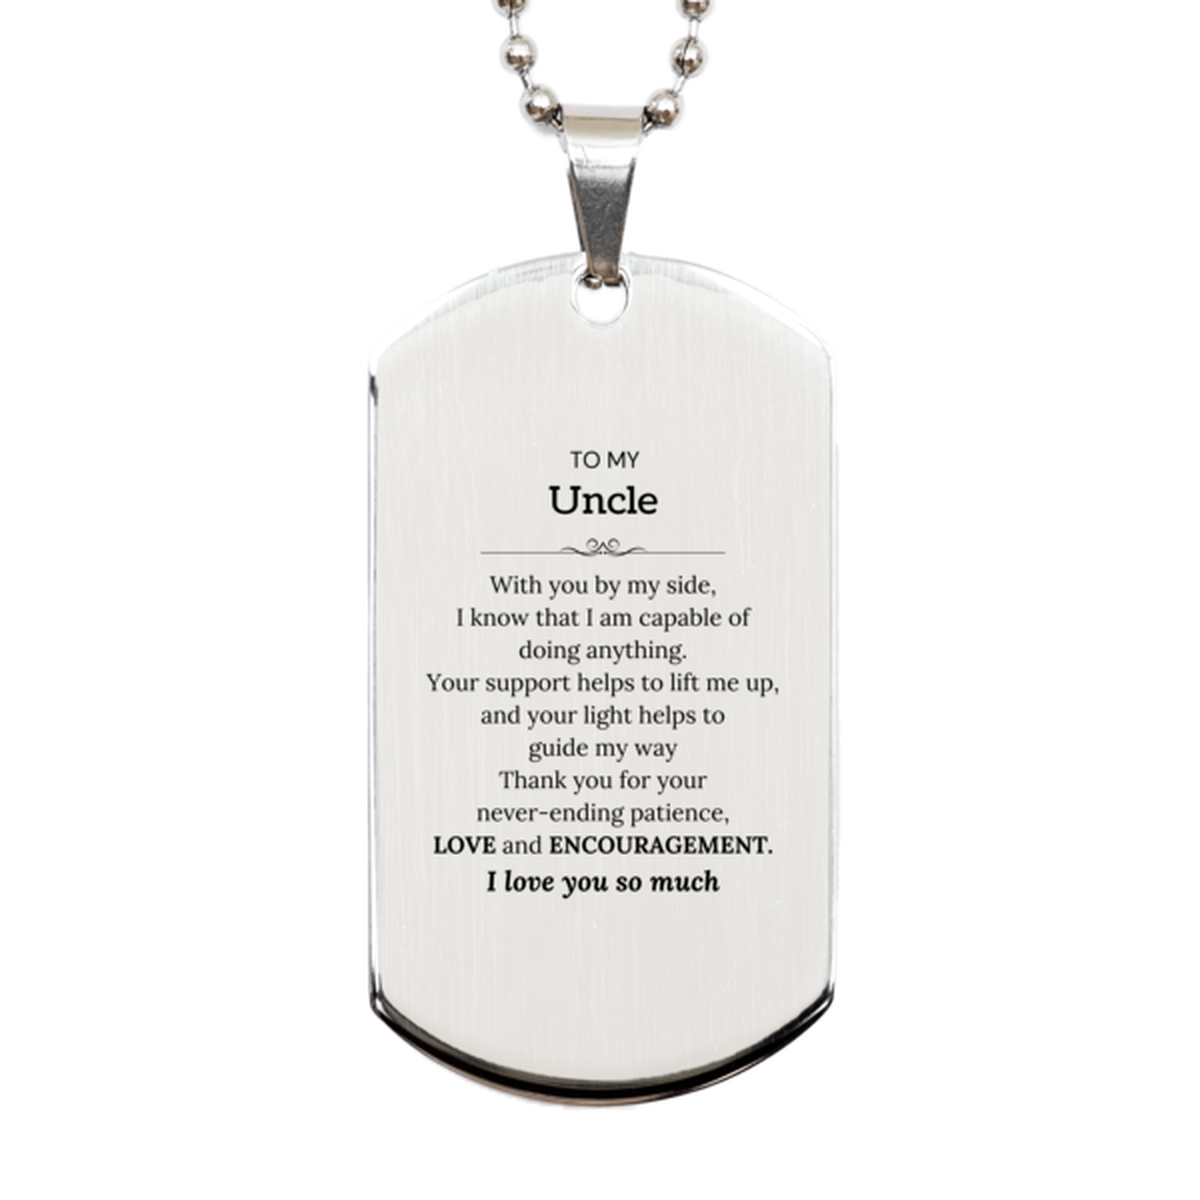 Appreciation Uncle Silver Dog Tag Gifts, To My Uncle Birthday Christmas Wedding Keepsake Gifts for Uncle With you by my side, I know that I am capable of doing anything. I love you so much